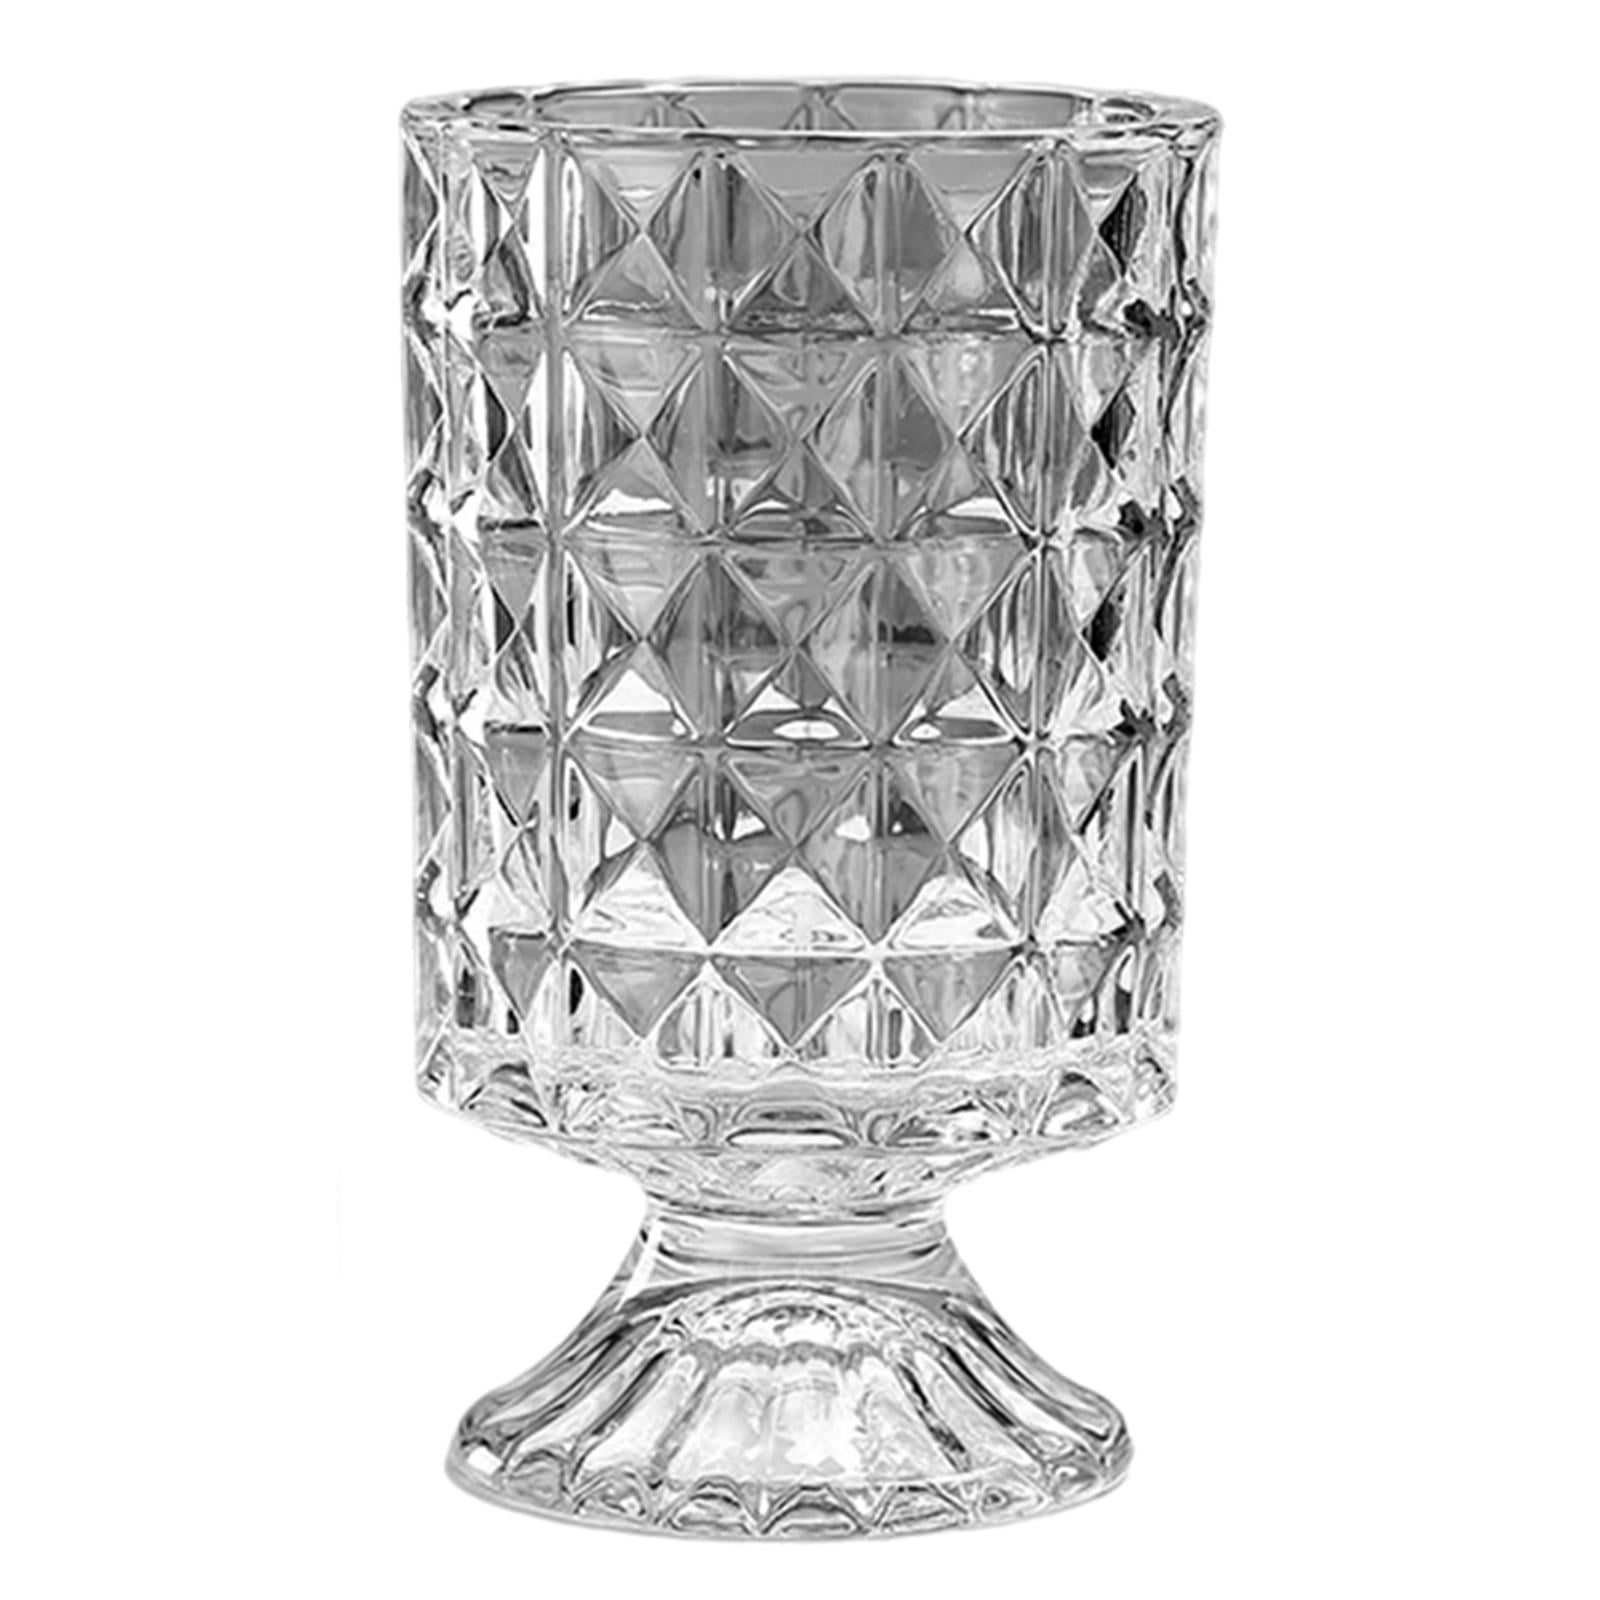 6-Pack 4-inch Glass Vase Candle Holder Wedding Centerpiece Square Cube 4x4x4 Lot 